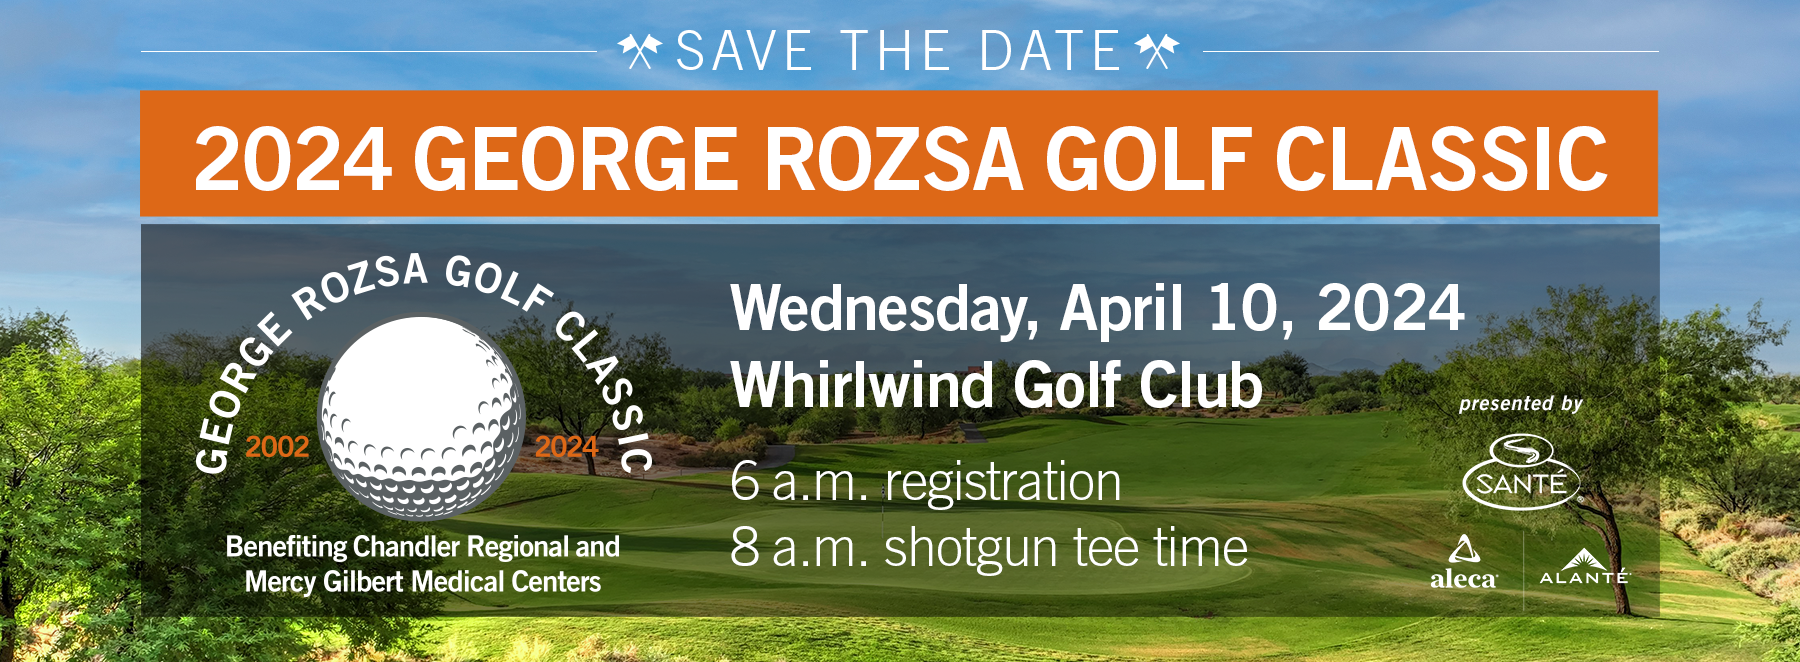 George Rozsa Golf Classic Text Banner 2024